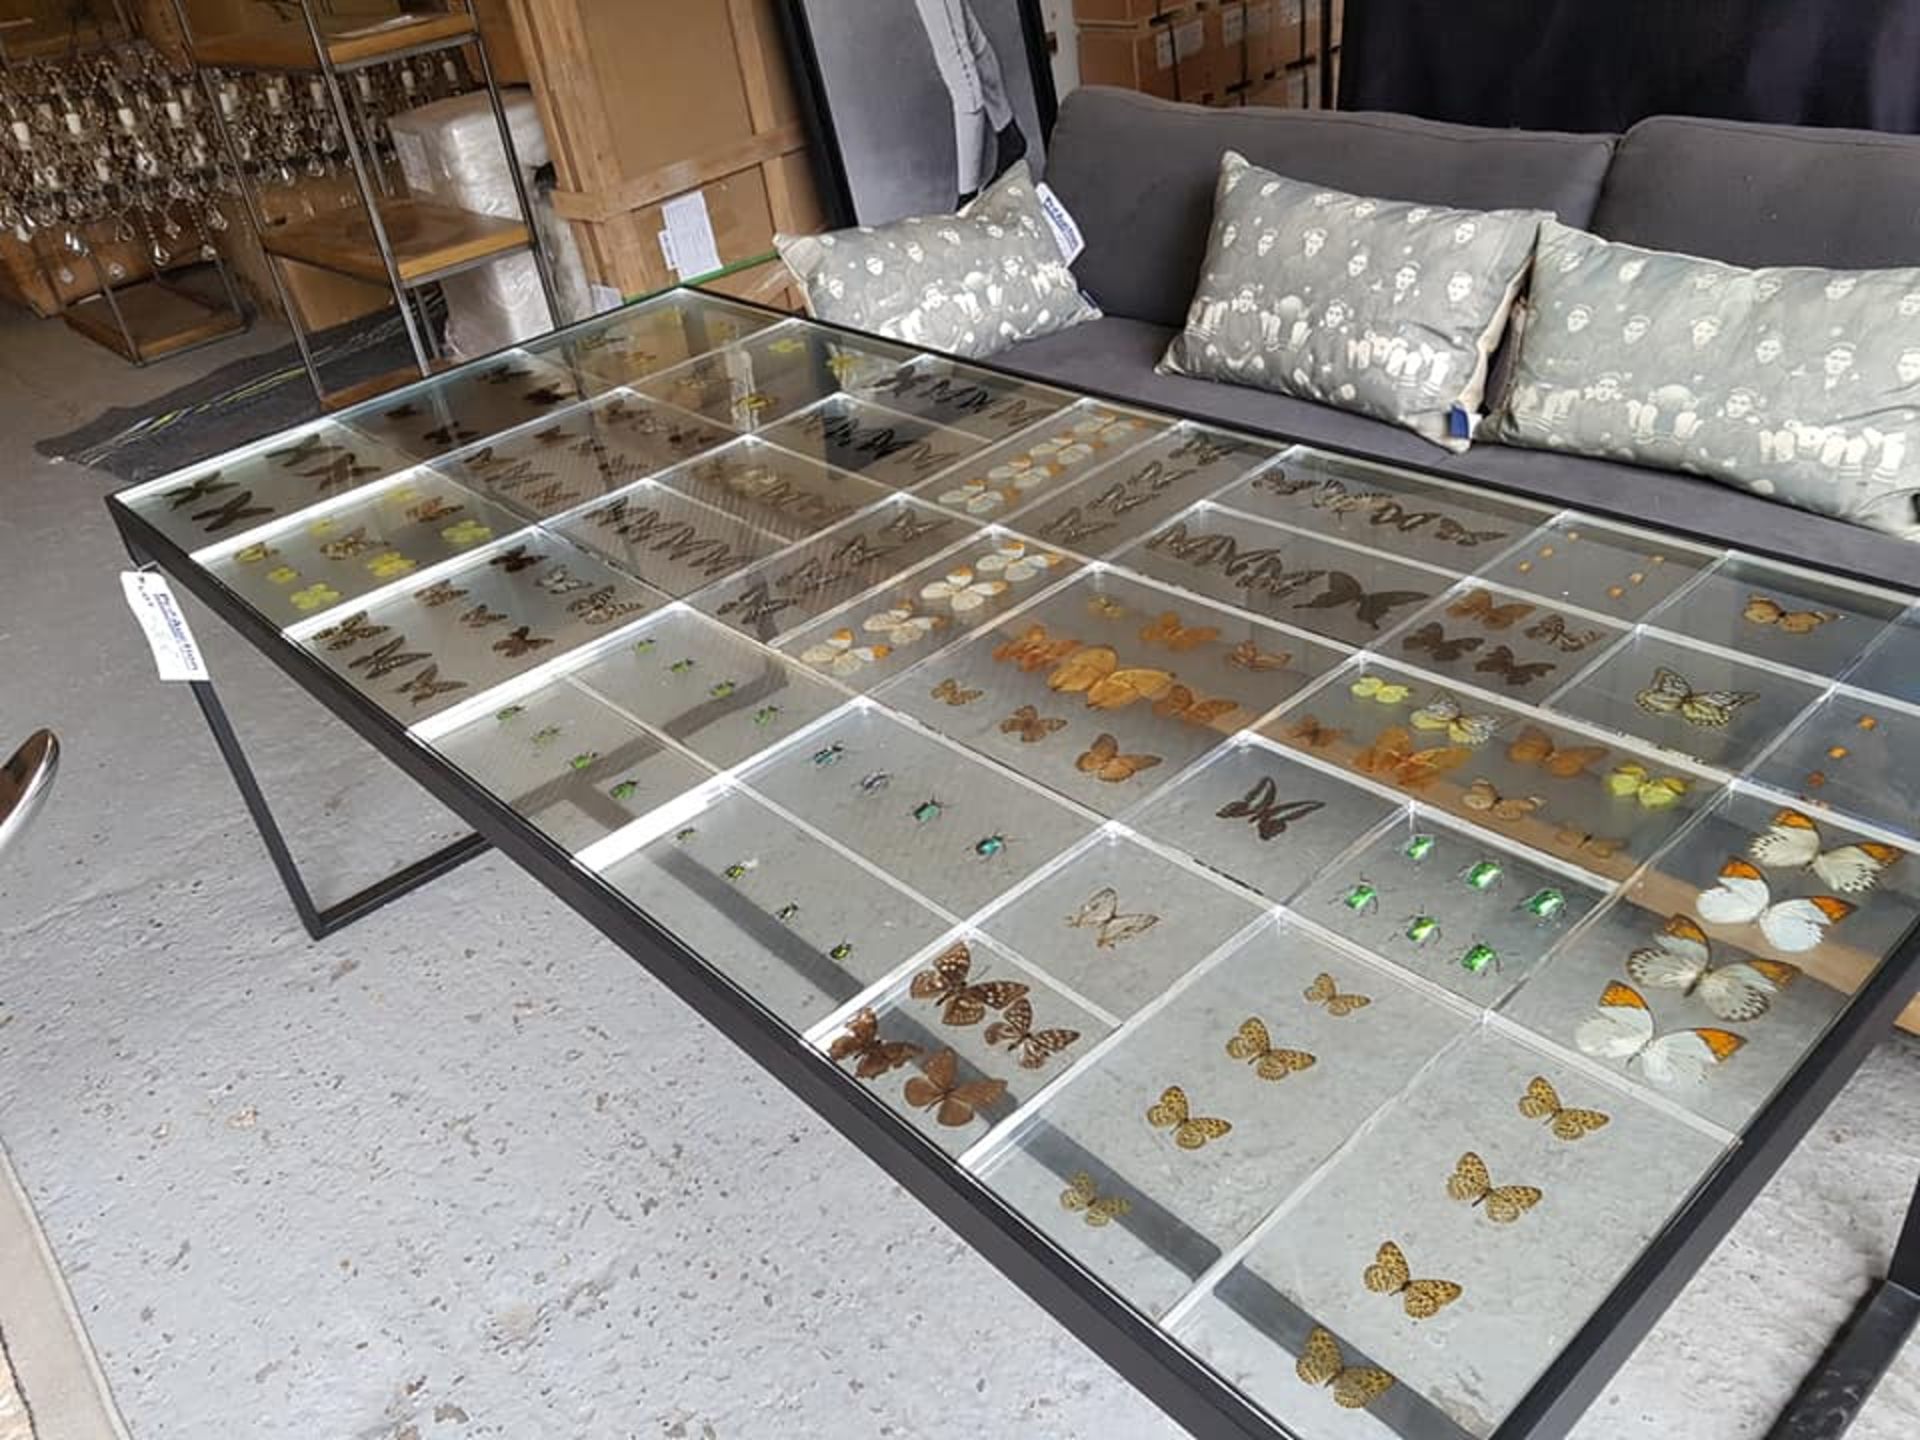 Butterfly Dining Table 197cm Acrylic & Plated Black 197 4 x 92 4 x 75cm RRP £6150 - Image 2 of 4